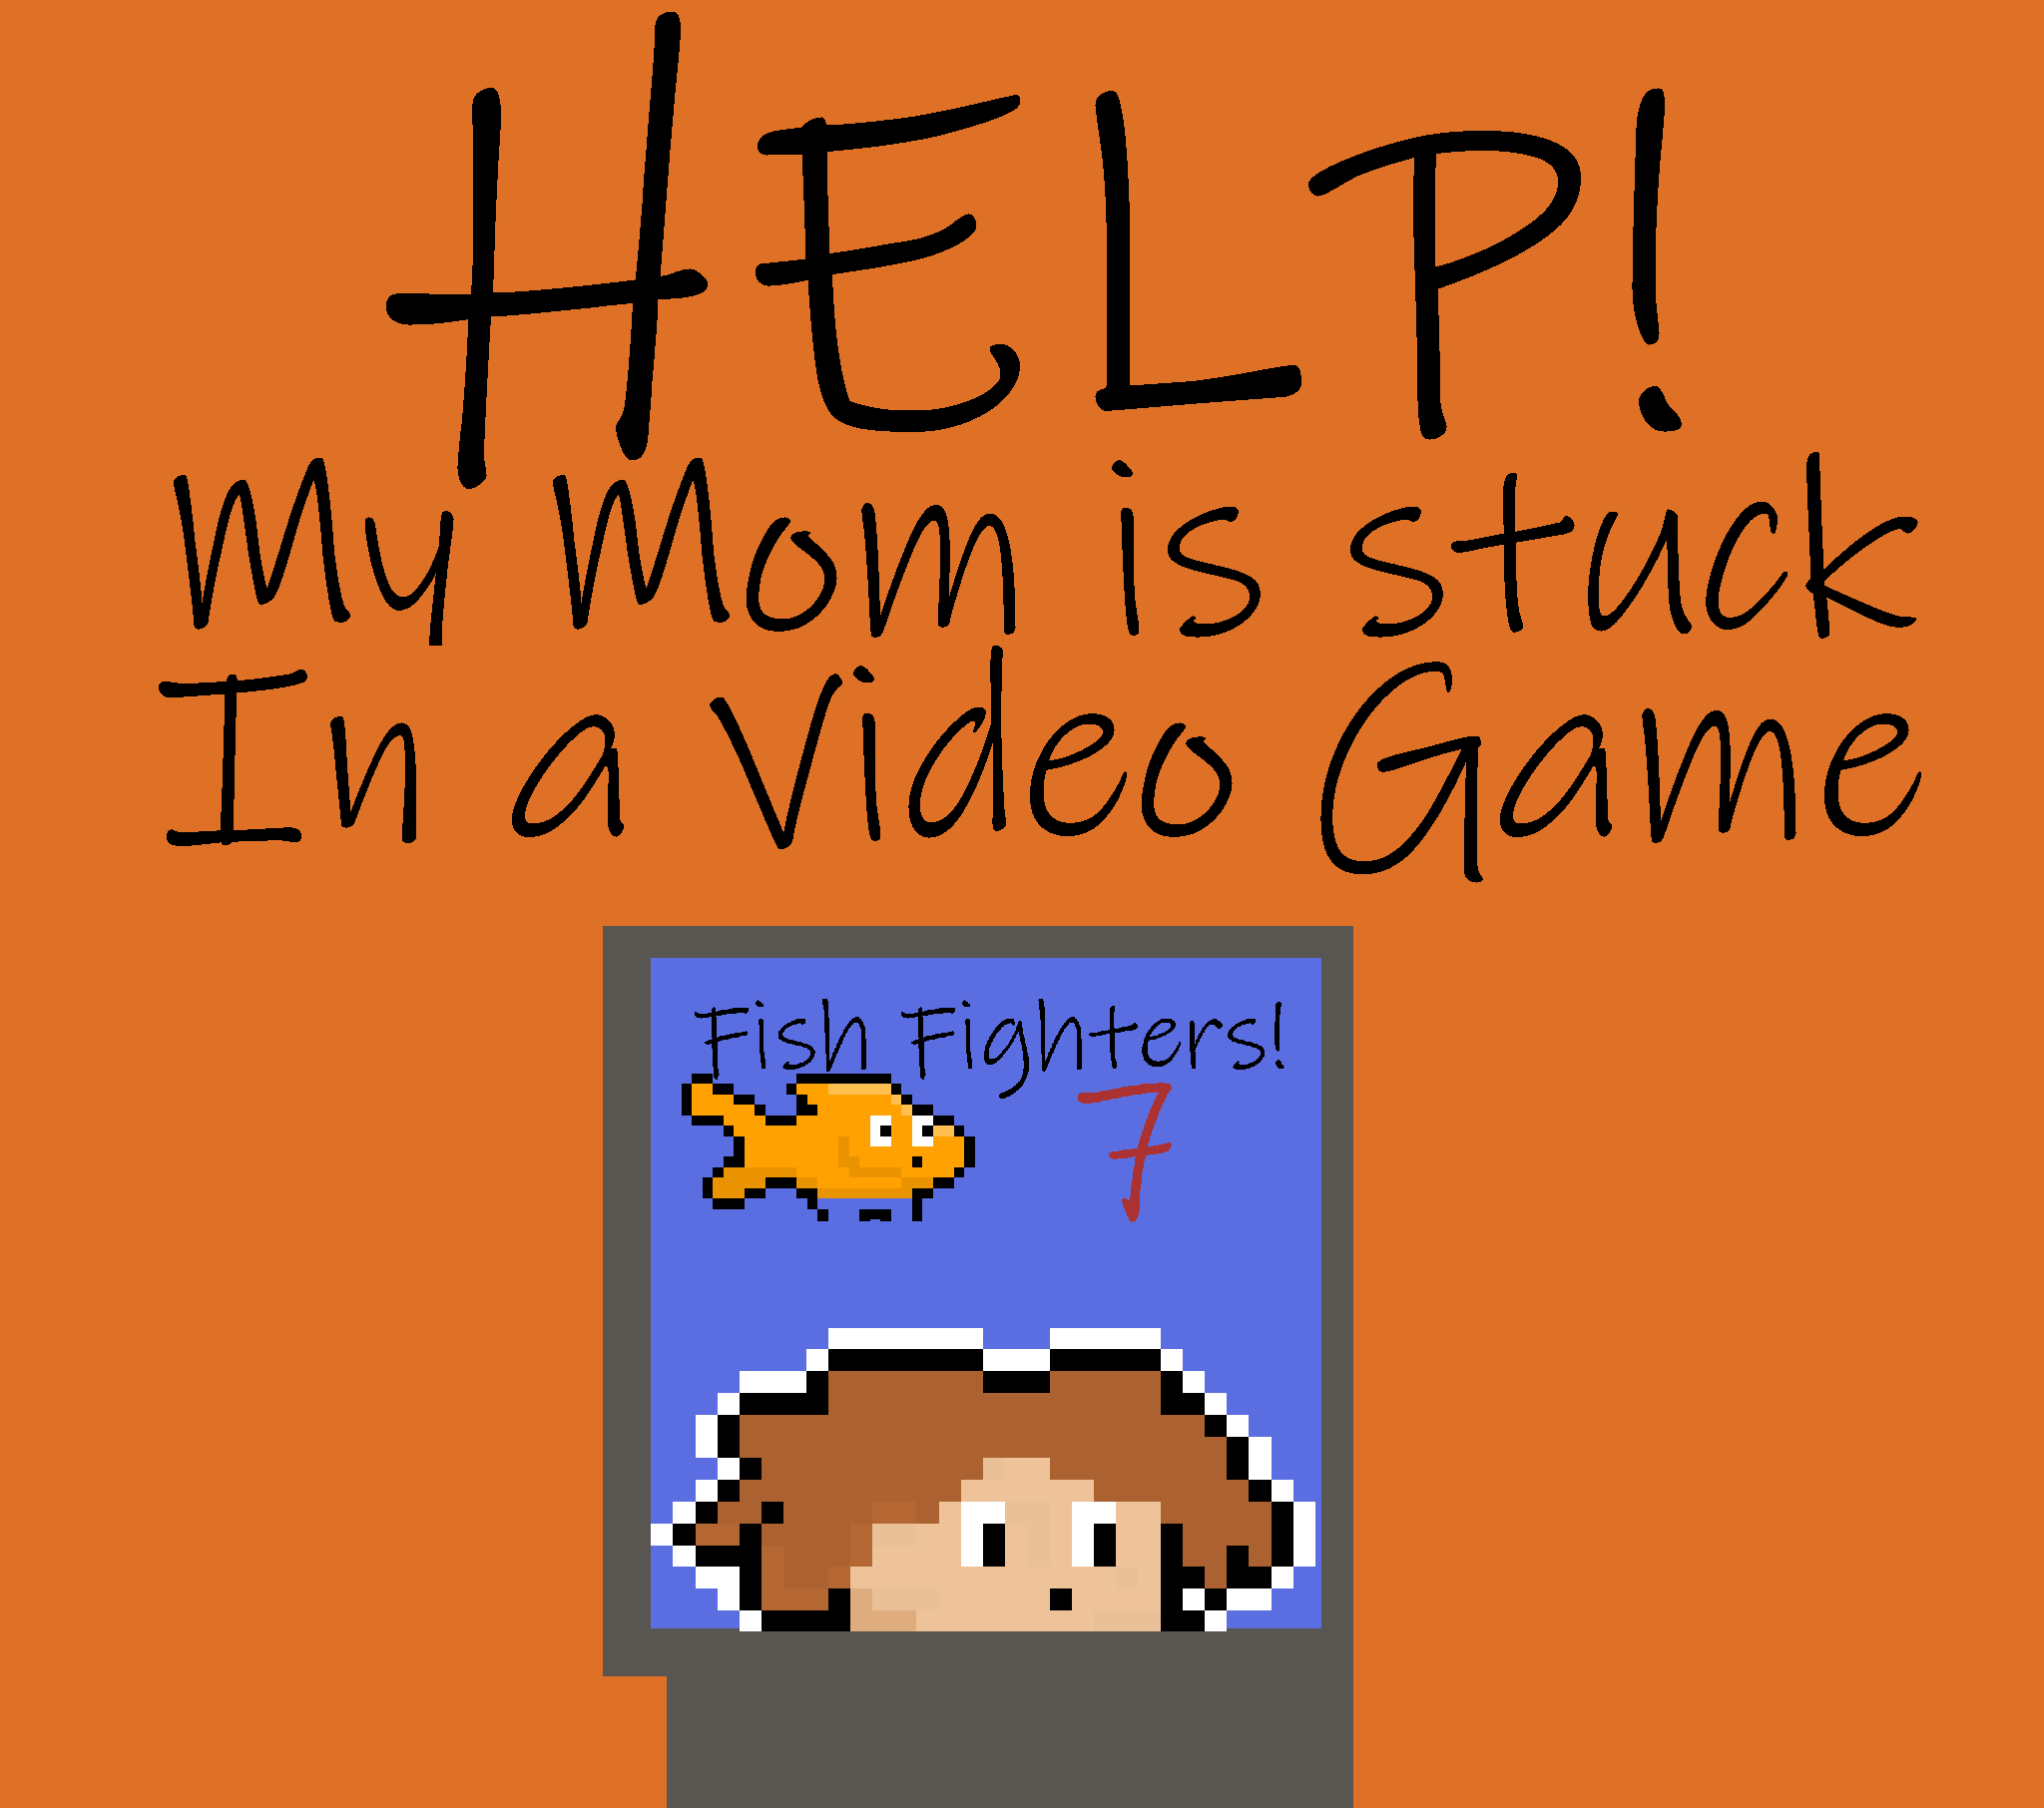 Help My Moms Stuck In a Video Game!